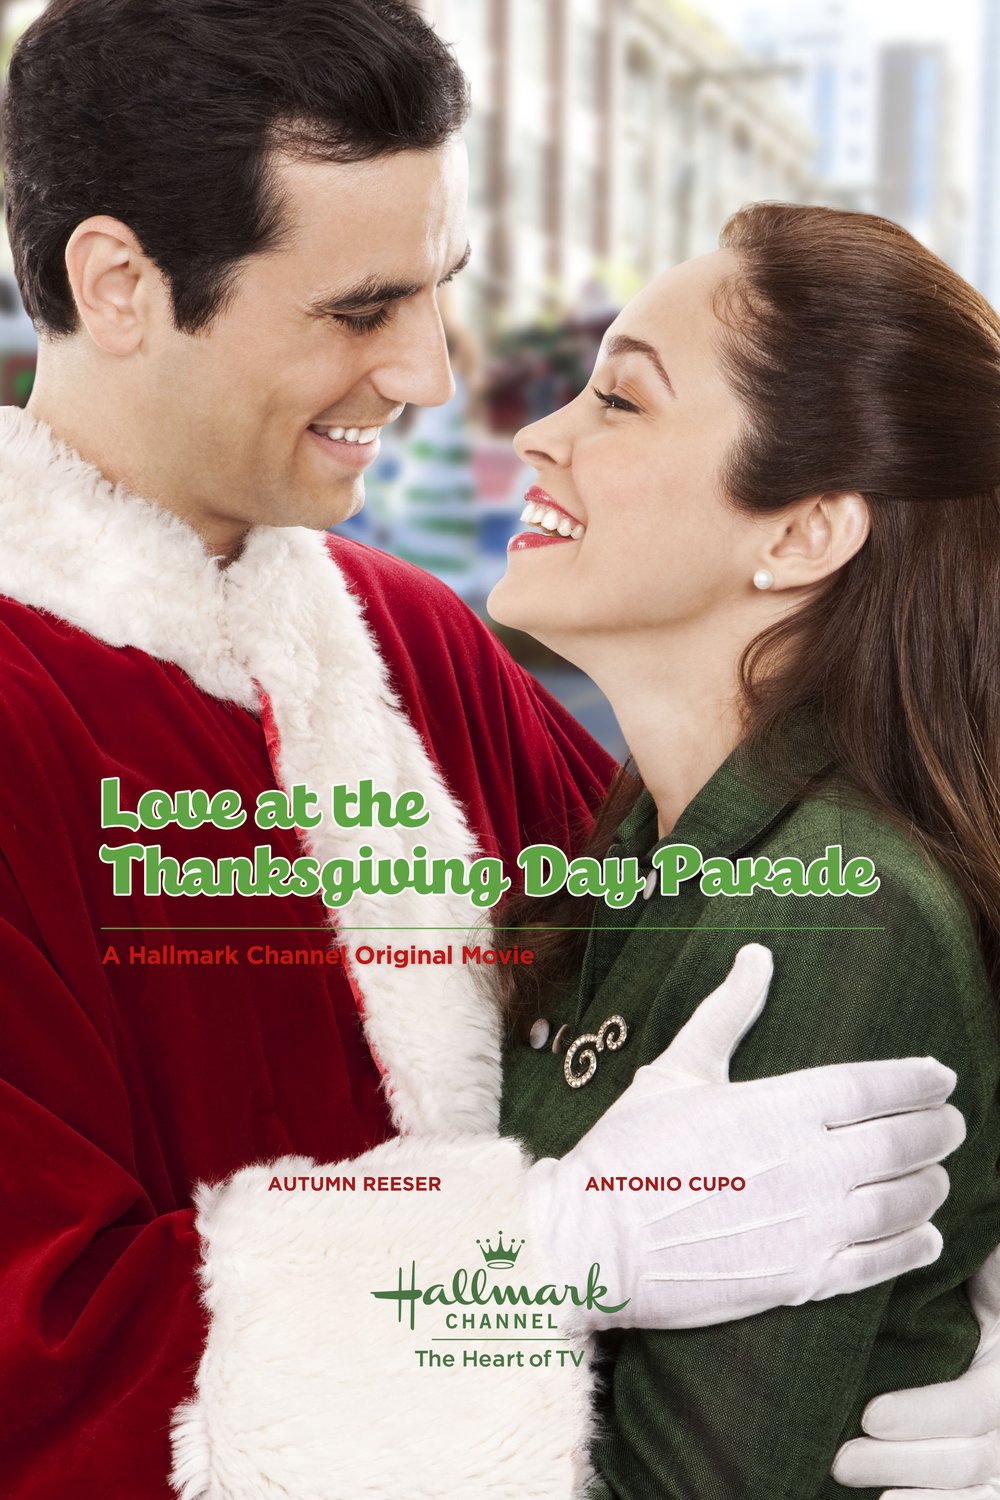 Poster of the movie Love at the Thanksgiving Day Parade